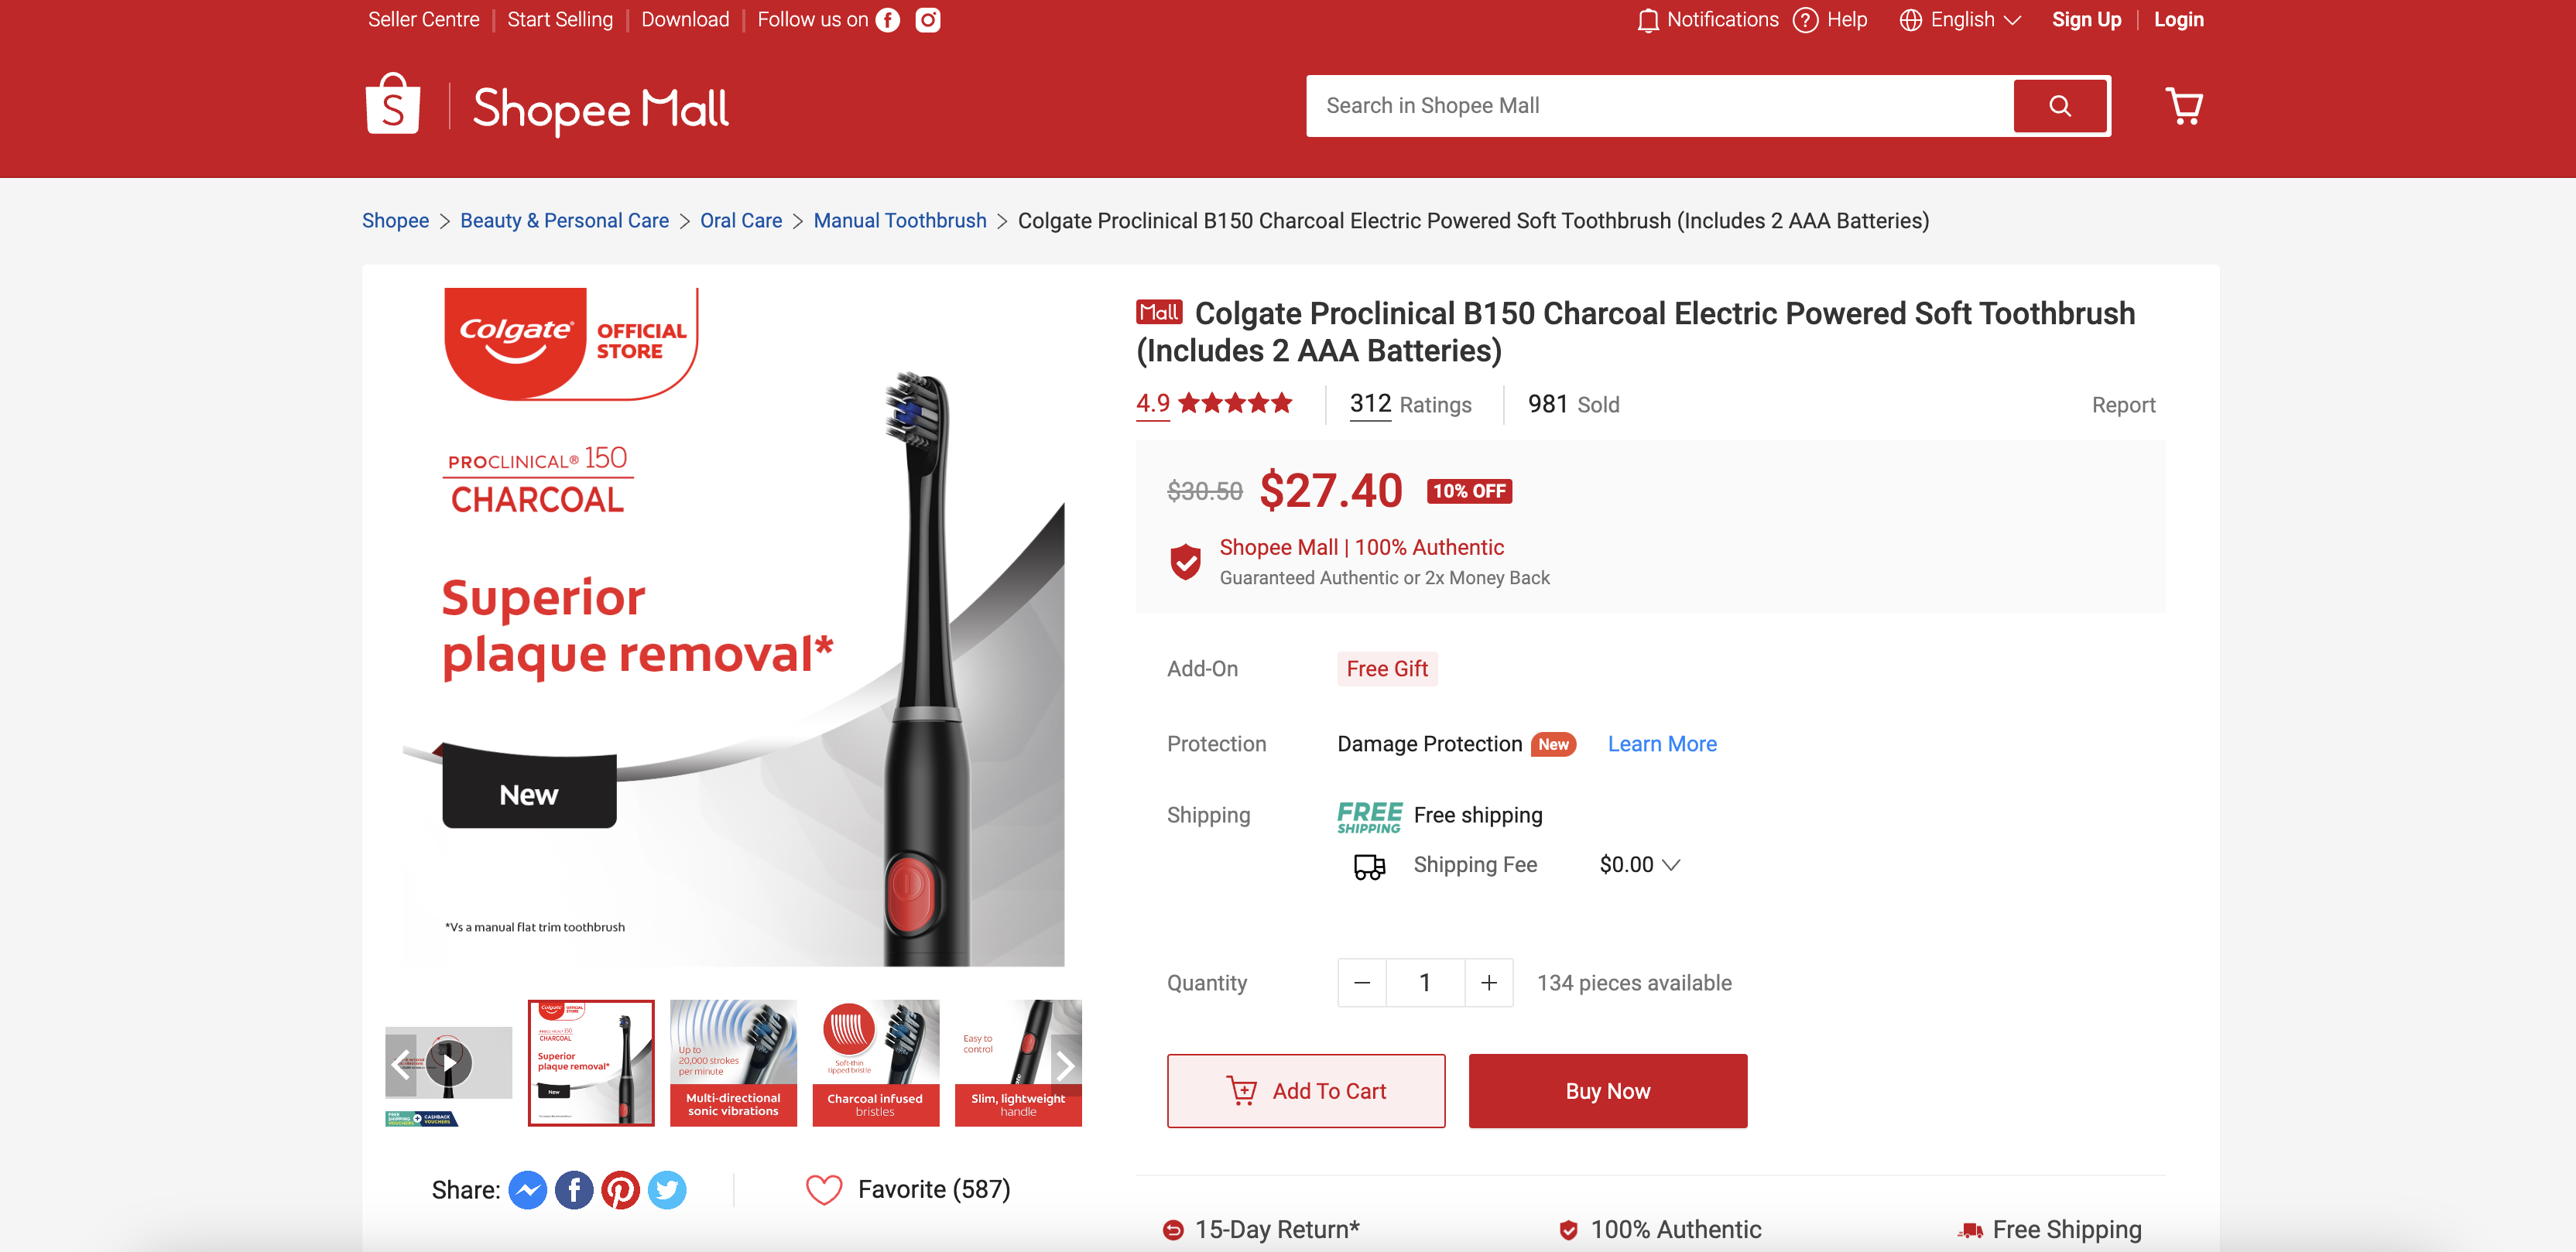 Colgate Proclinical B150 Charcoal Electric Powered Soft Toothbrush